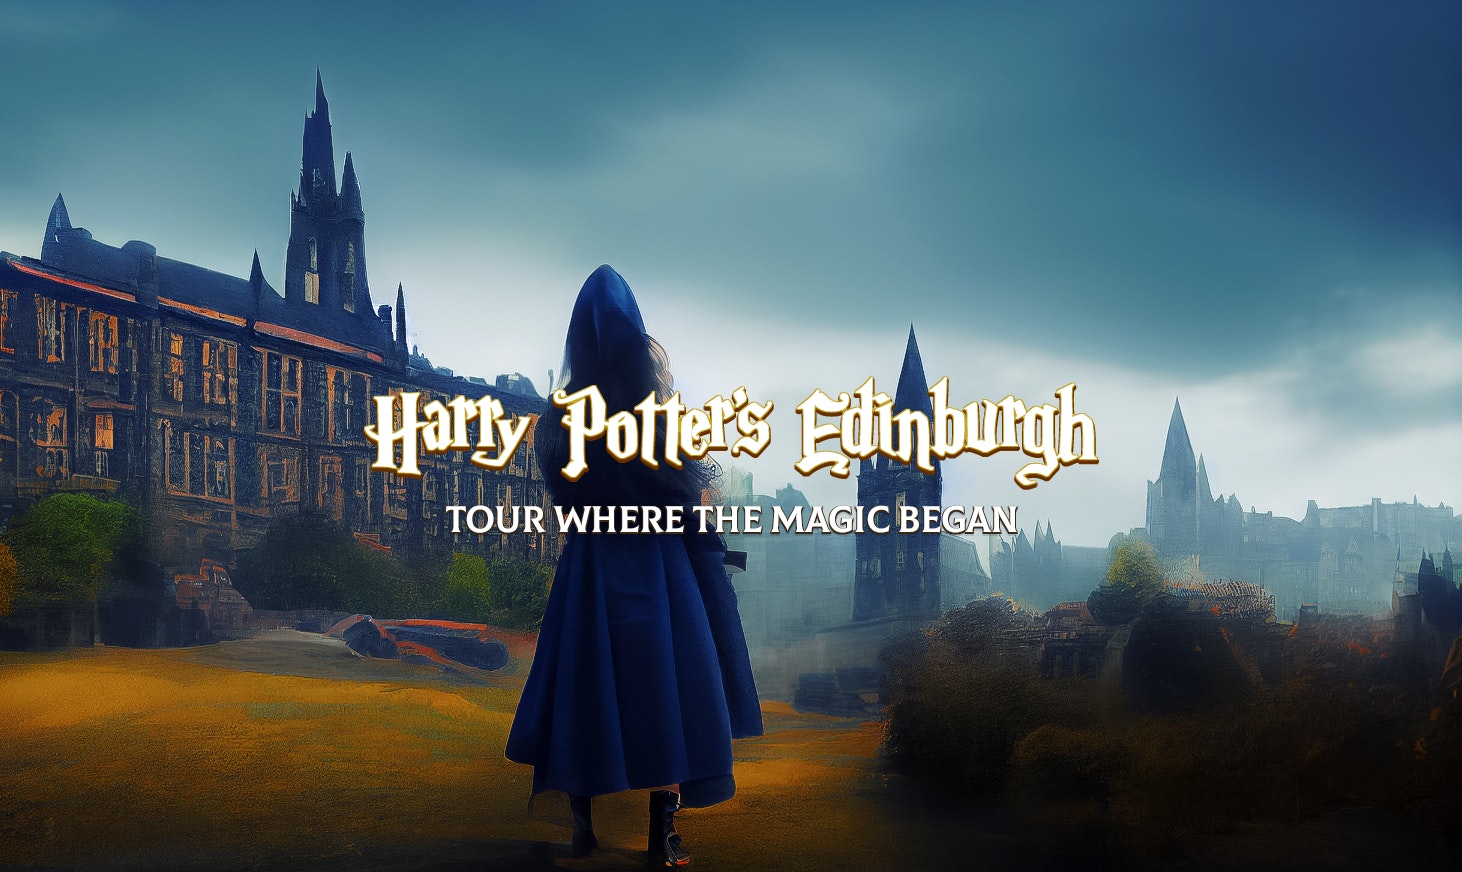 Harry Potter in Edinburgh: The Places Behind the Story